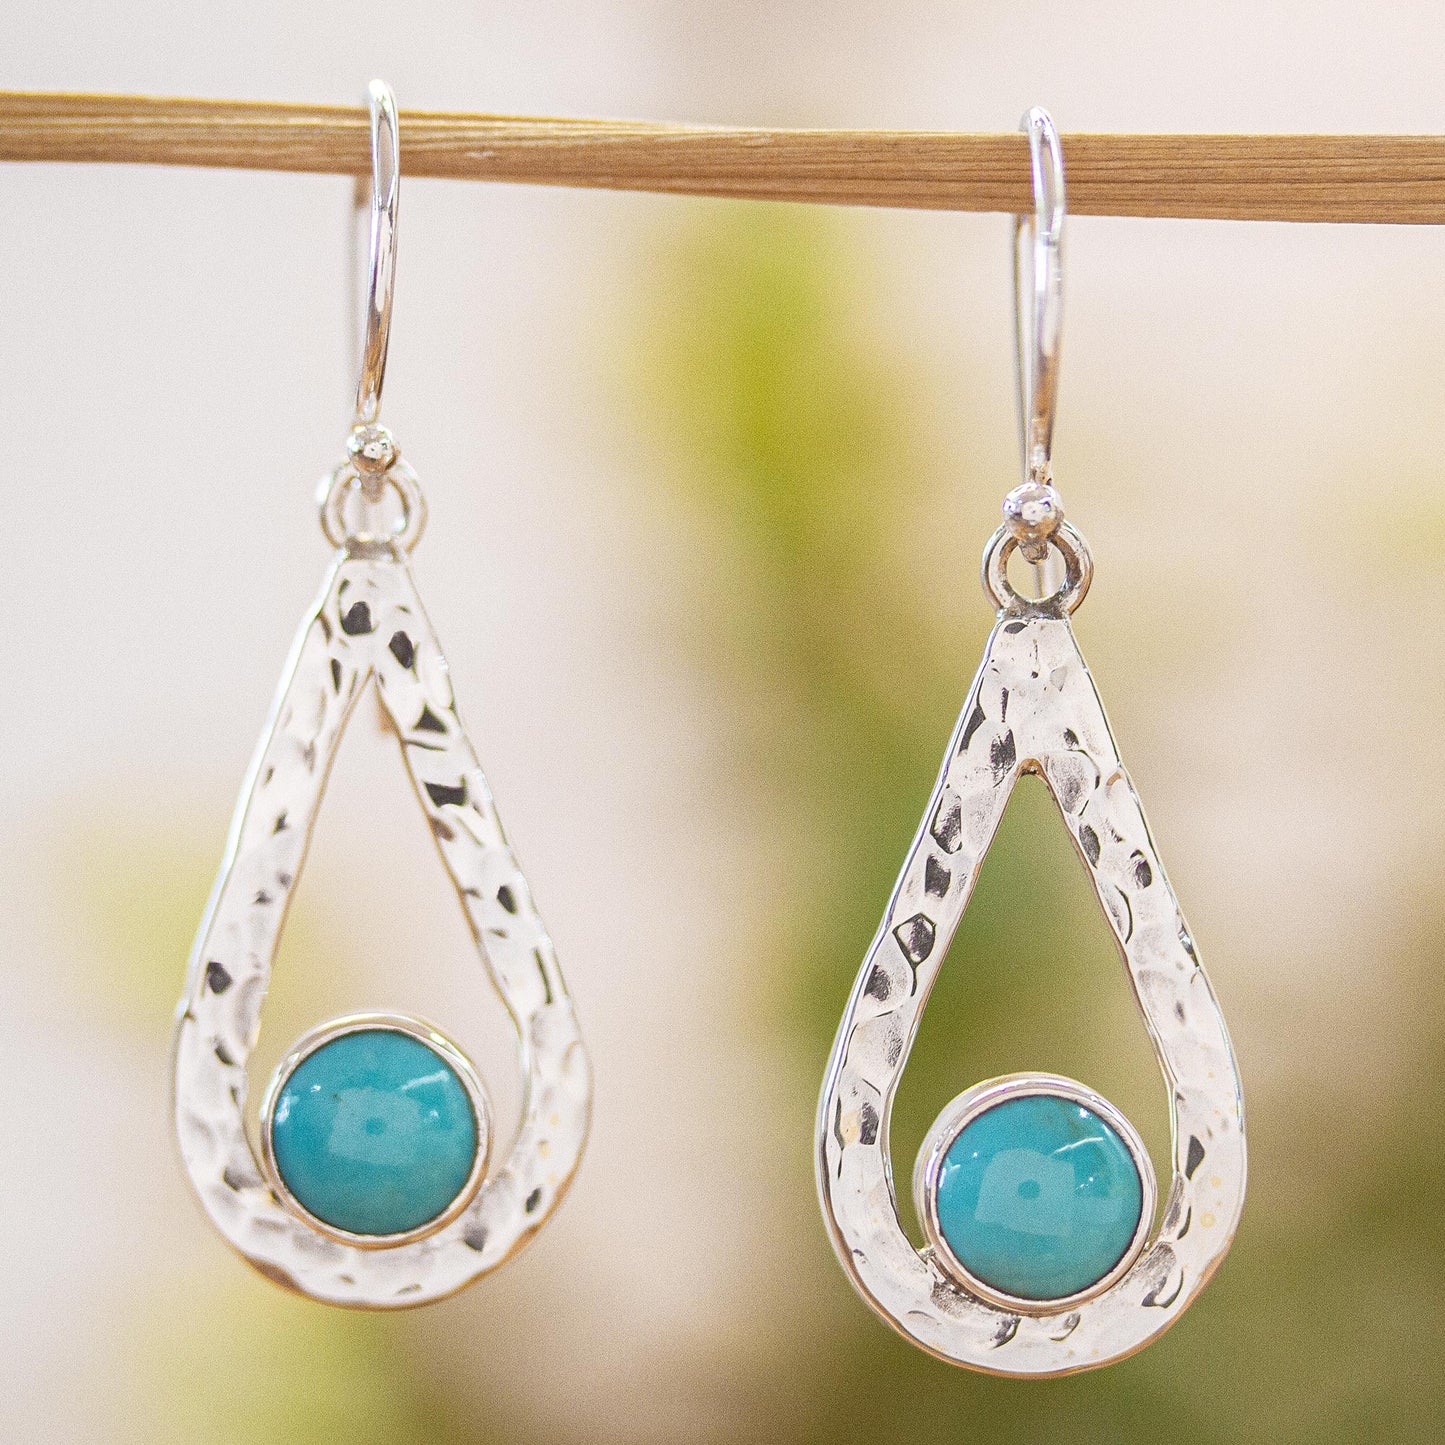 Luminous Rain Handcrafted Textured Taxco Silver Natural Turquoise Earrings